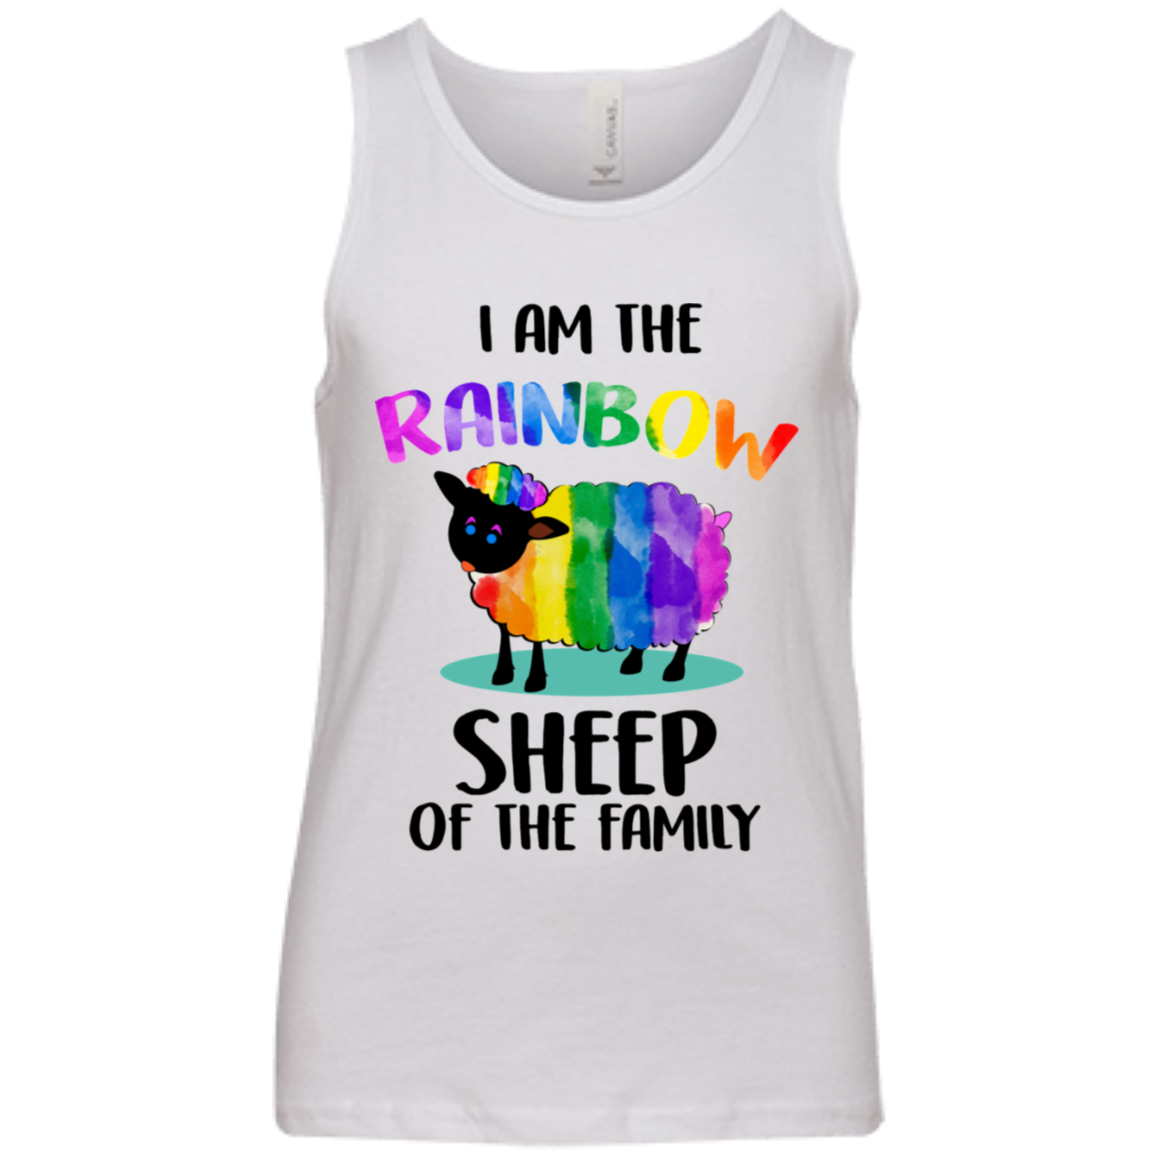 "I Am The Rainbow Sheep Of The Family"  White Union Pride T-Shirts